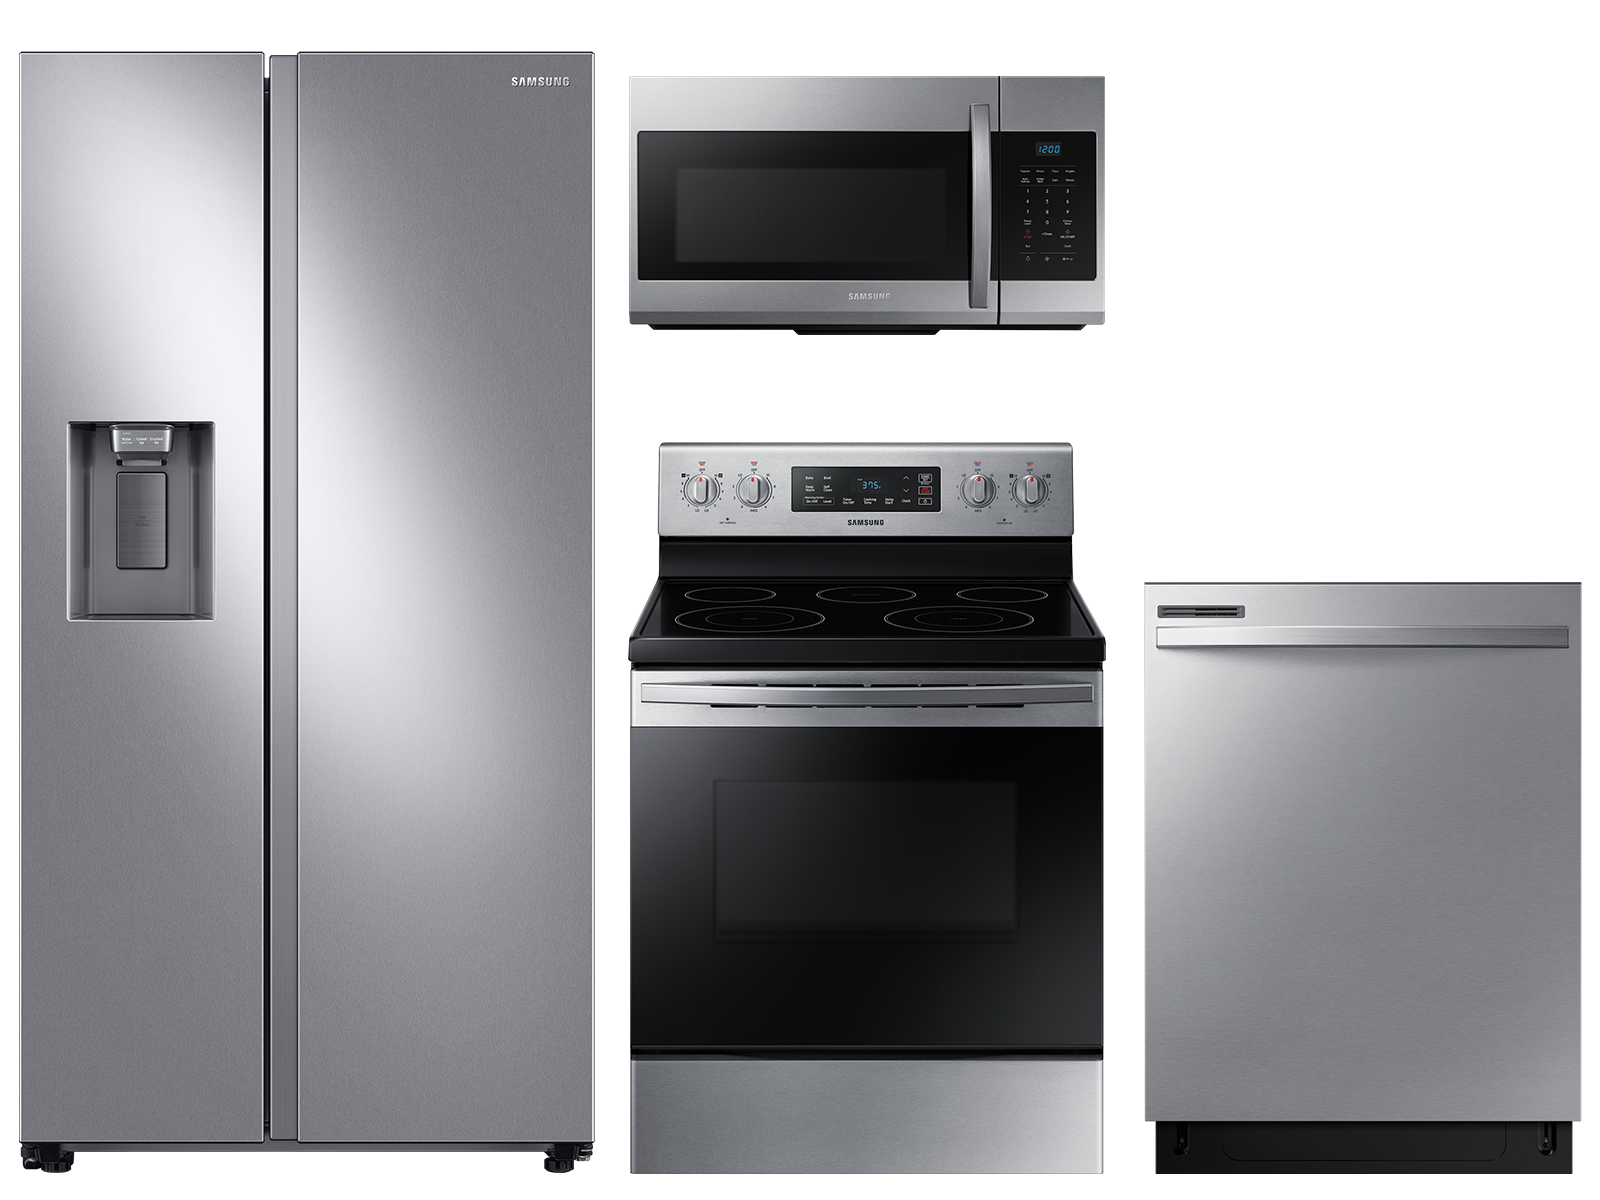 Large capacity Side-by-Side refrigerator & electric range package in stainless steel